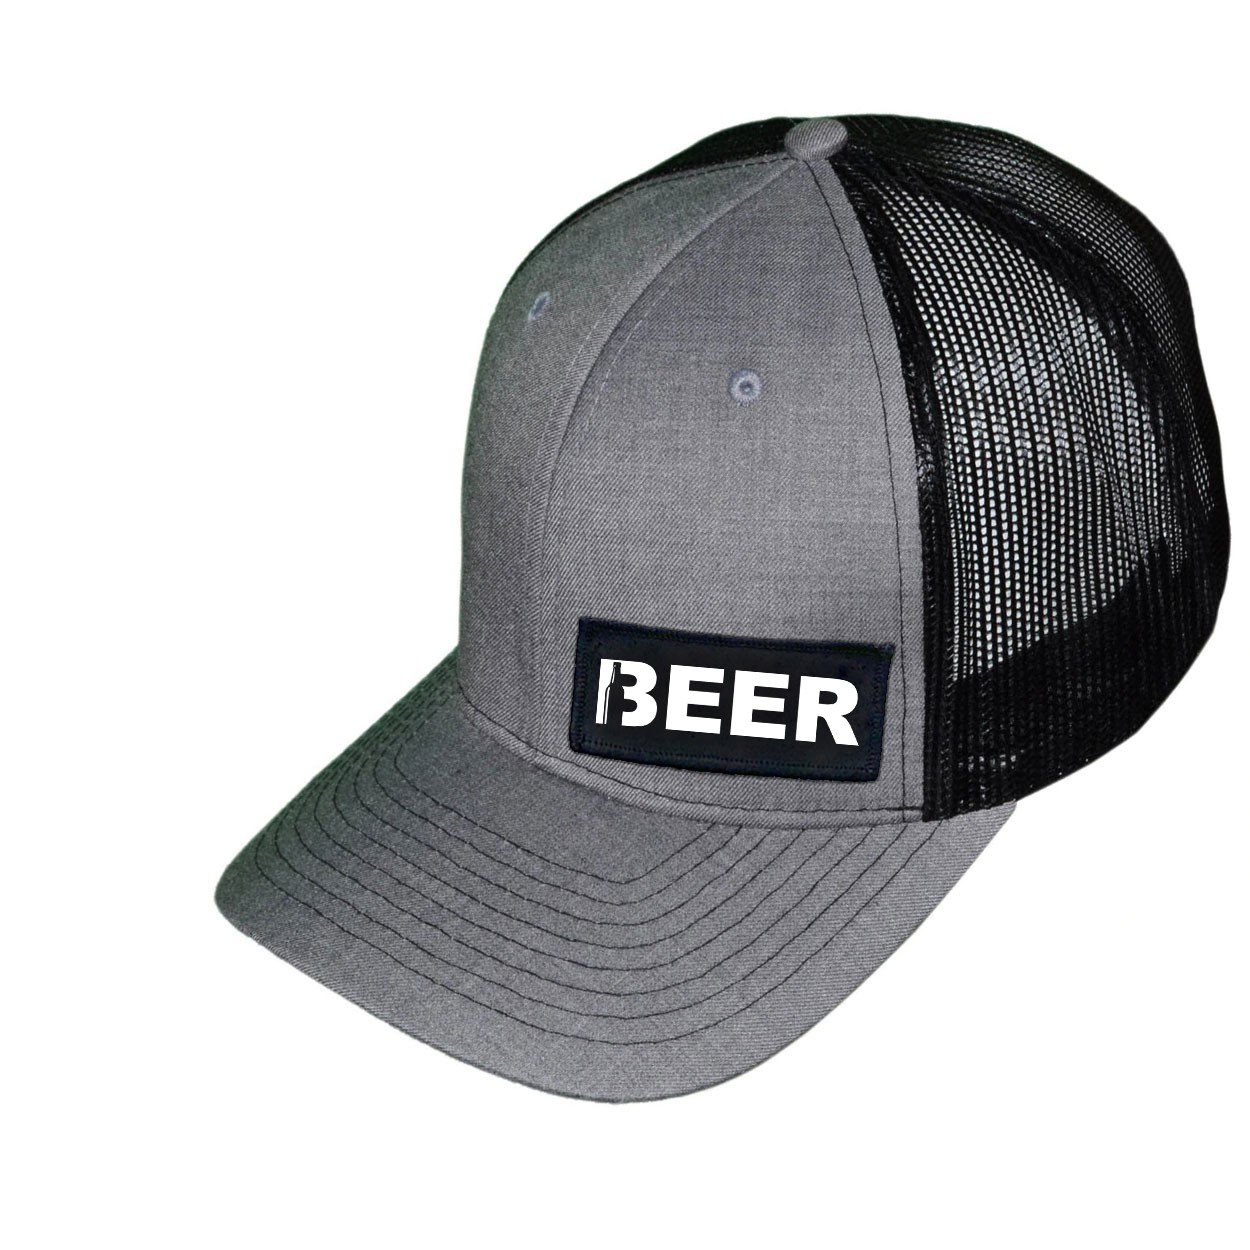 Beer Bottle Logo Night Out Woven Patch Snapback Trucker Hat Heather Gray/Black